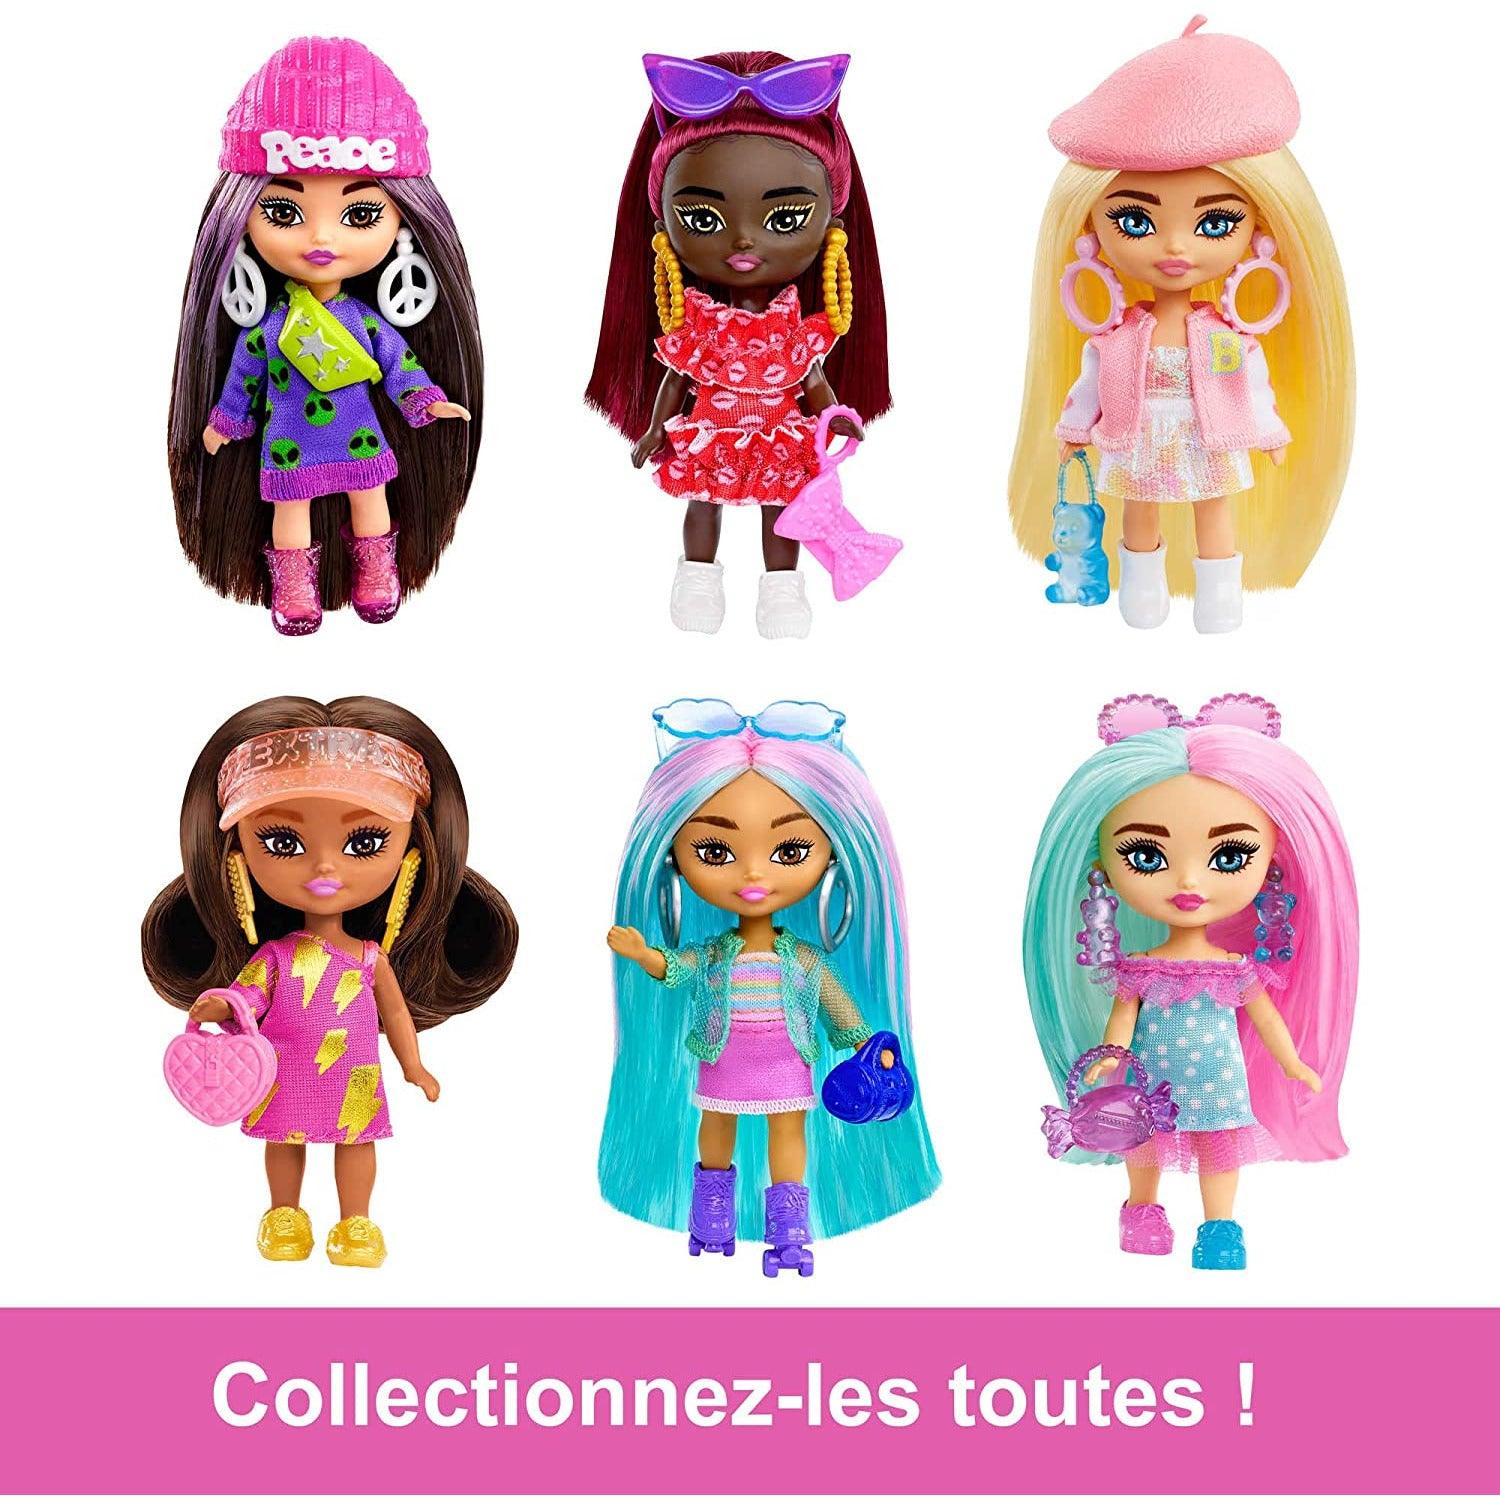 Barbie Extra Mini Minis Brunette Doll With Alien Sweater Dress, Peace Sign-Themed Clothes And Accessories - BumbleToys - 5-7 Years, Barbie, Barbie Extra, Dolls, Fashion Dolls & Accessories, Girls, Miniature Dolls & Accessories, OXE, Pre-Order